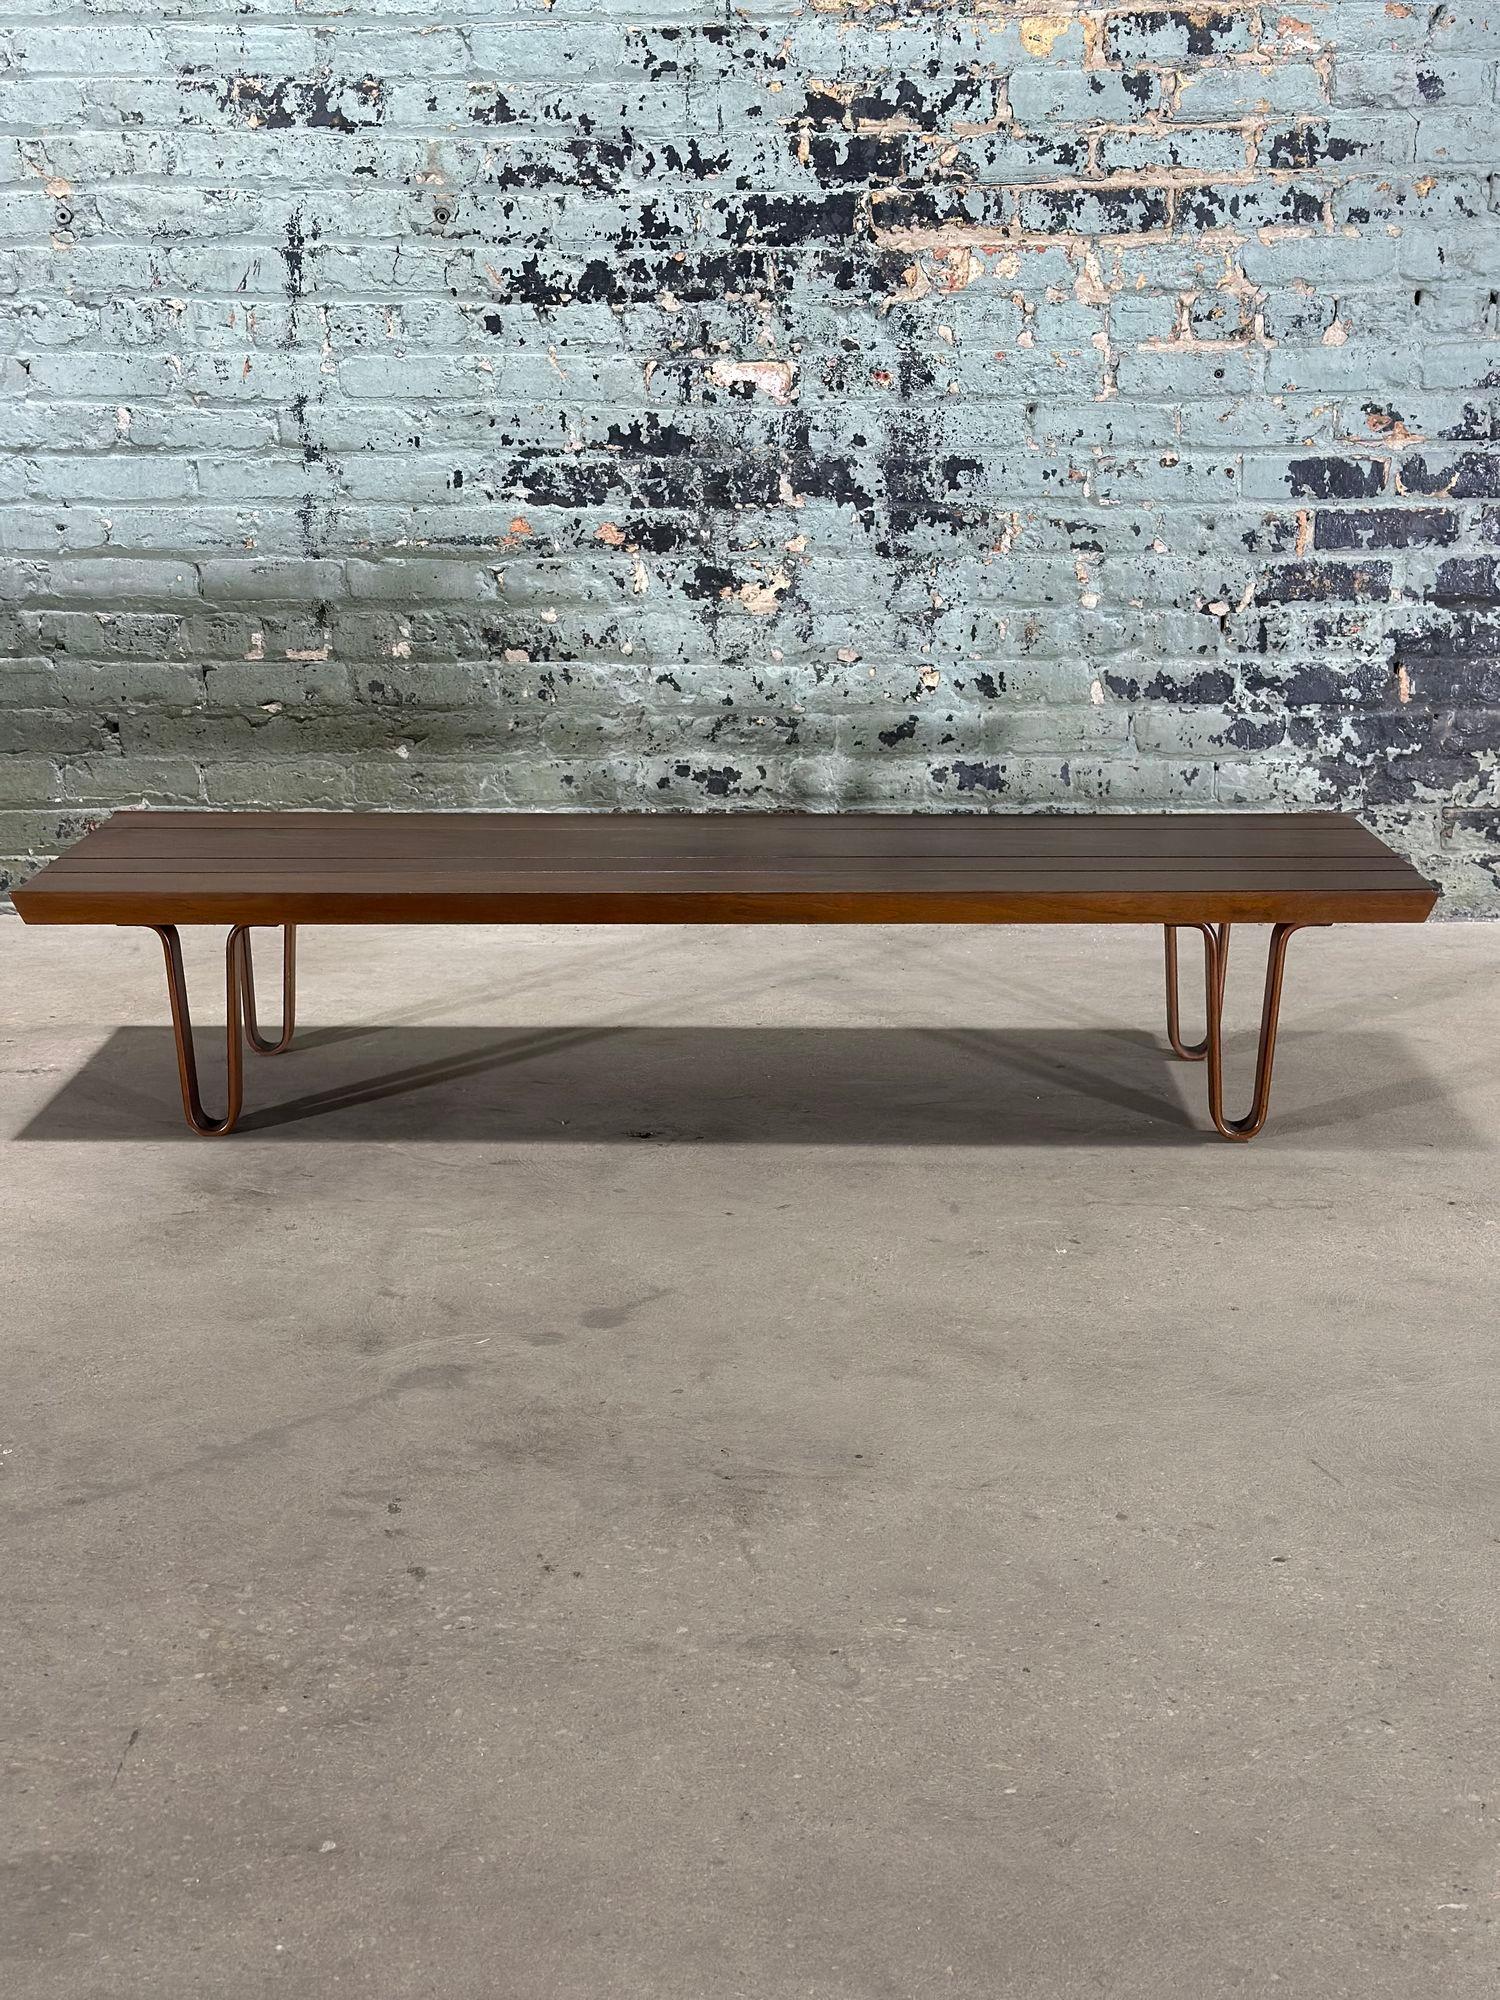 Edward Wormley Long John Bench by Dunbar, 1960. Bench has been completely restored.
Measures 59.75